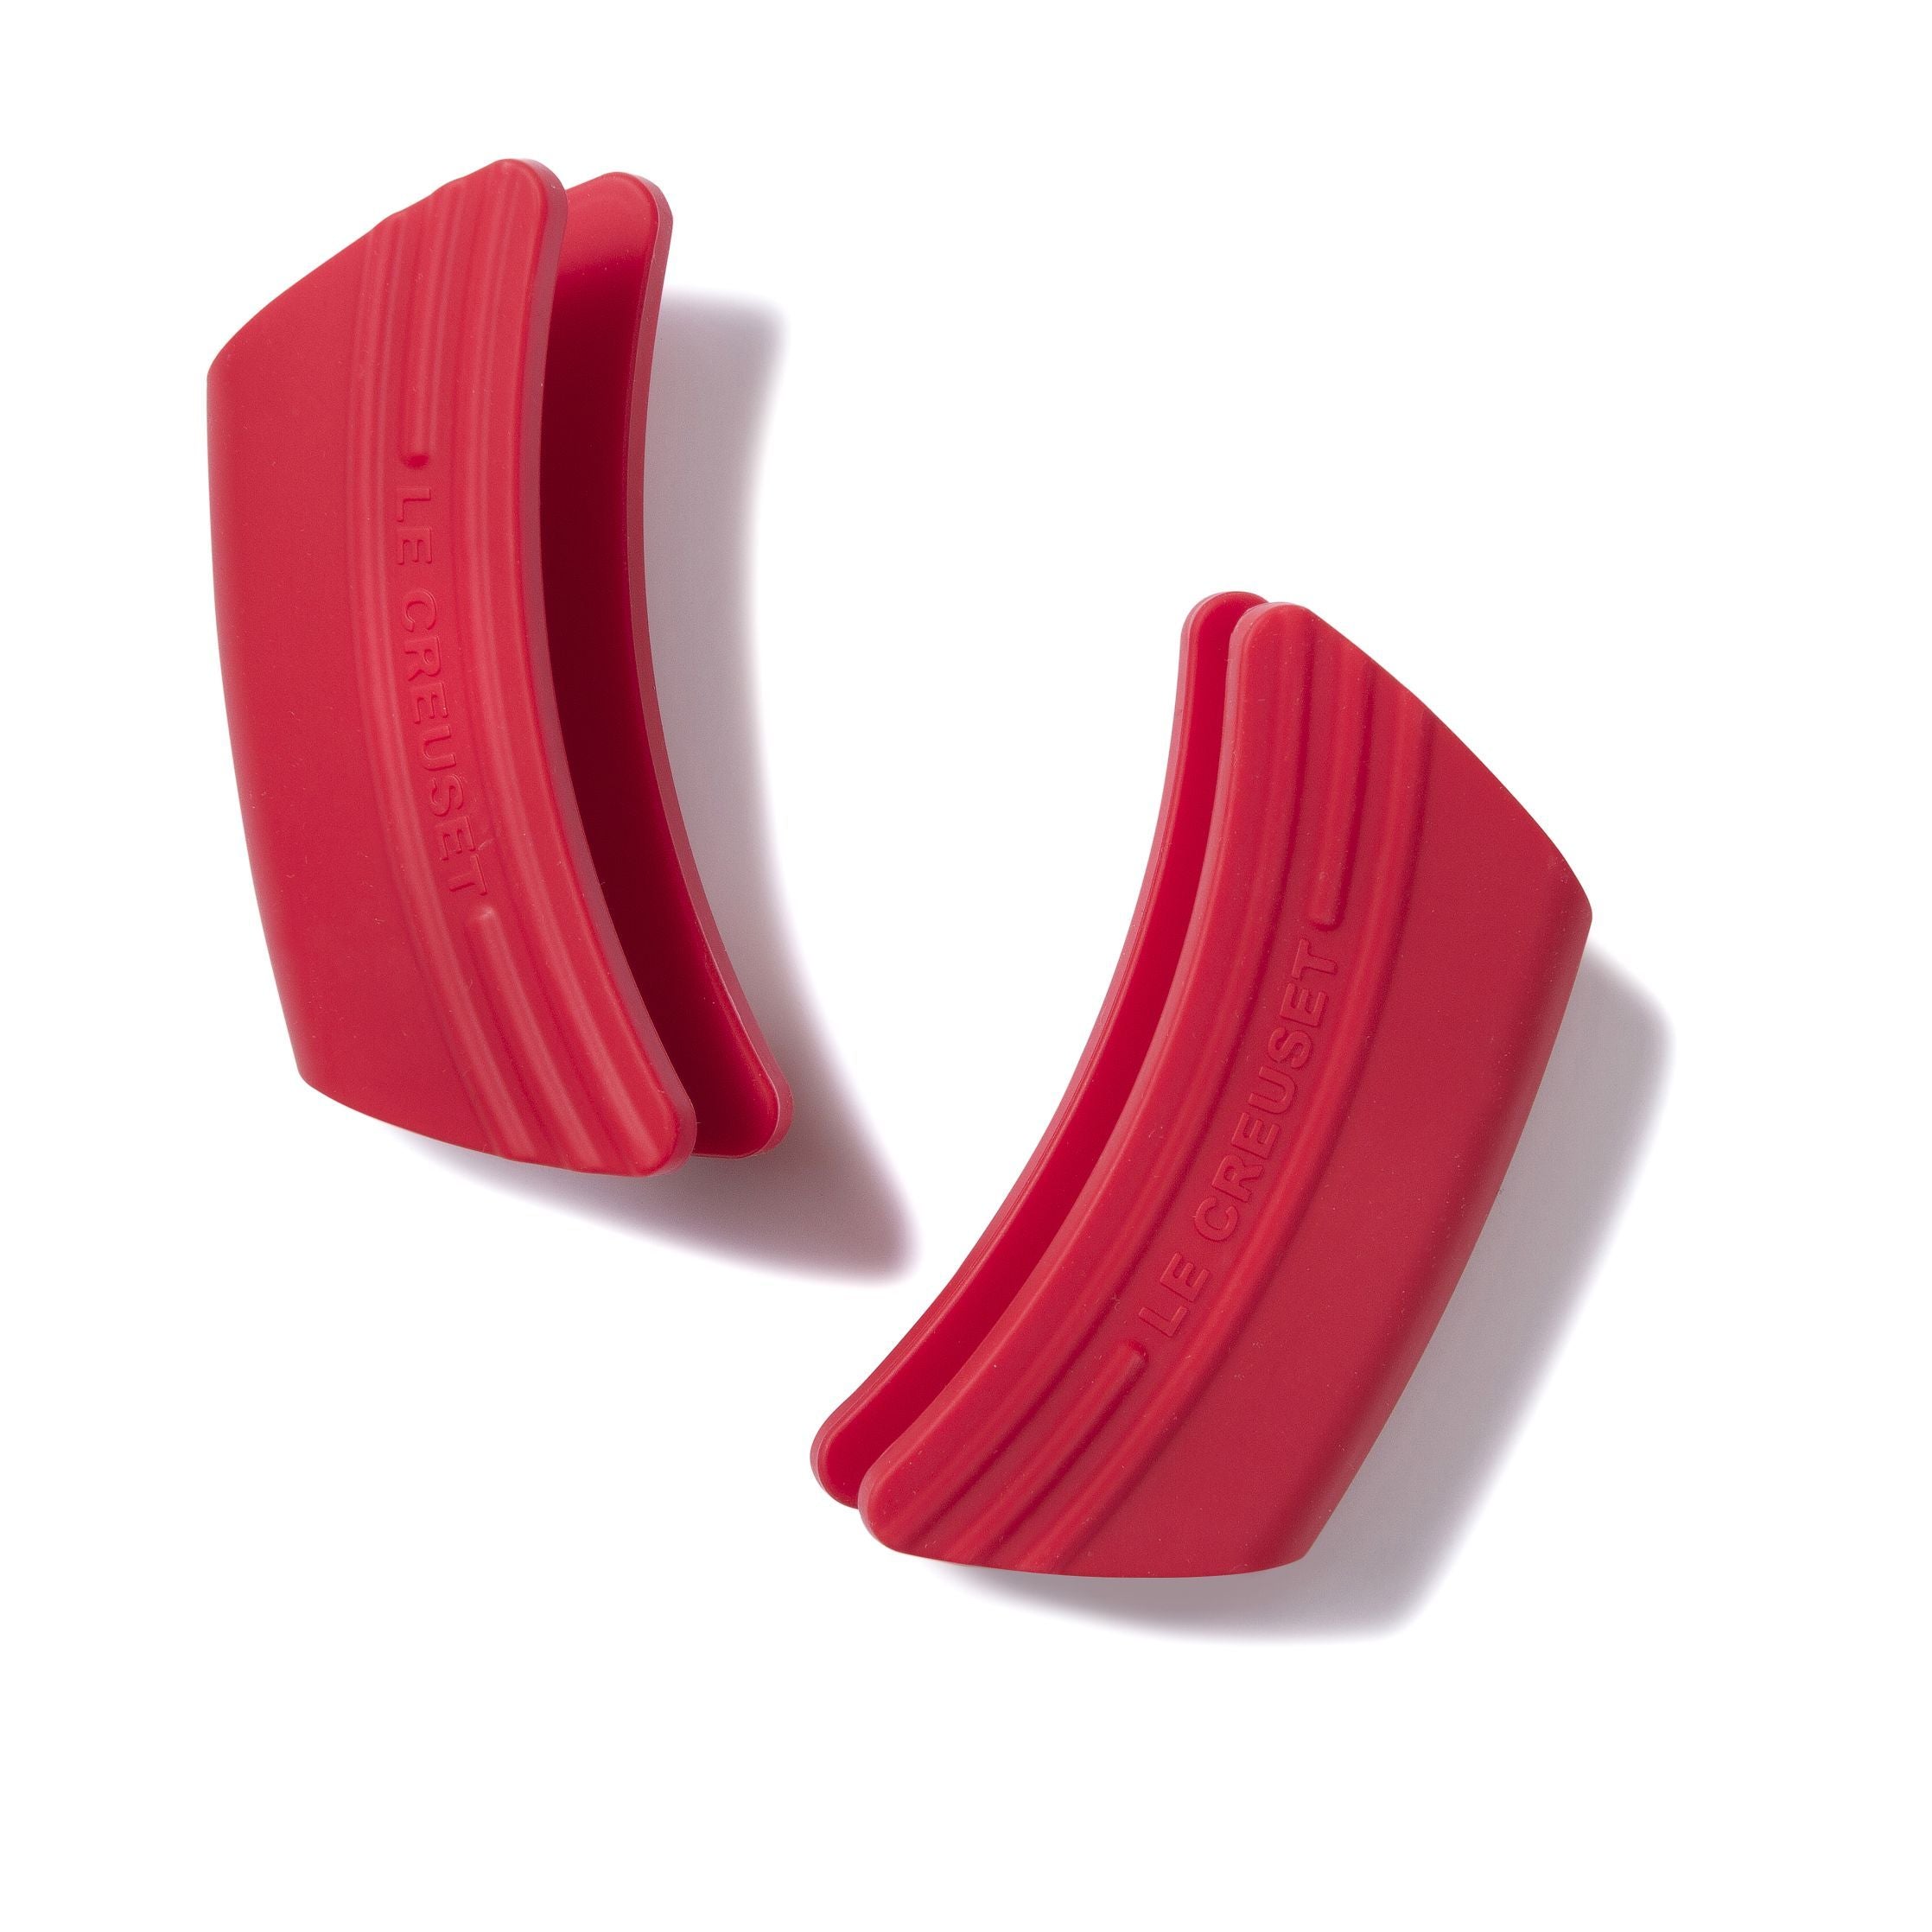 Le Creuset Silicone Many Guard 2 pcs., Cherry Red